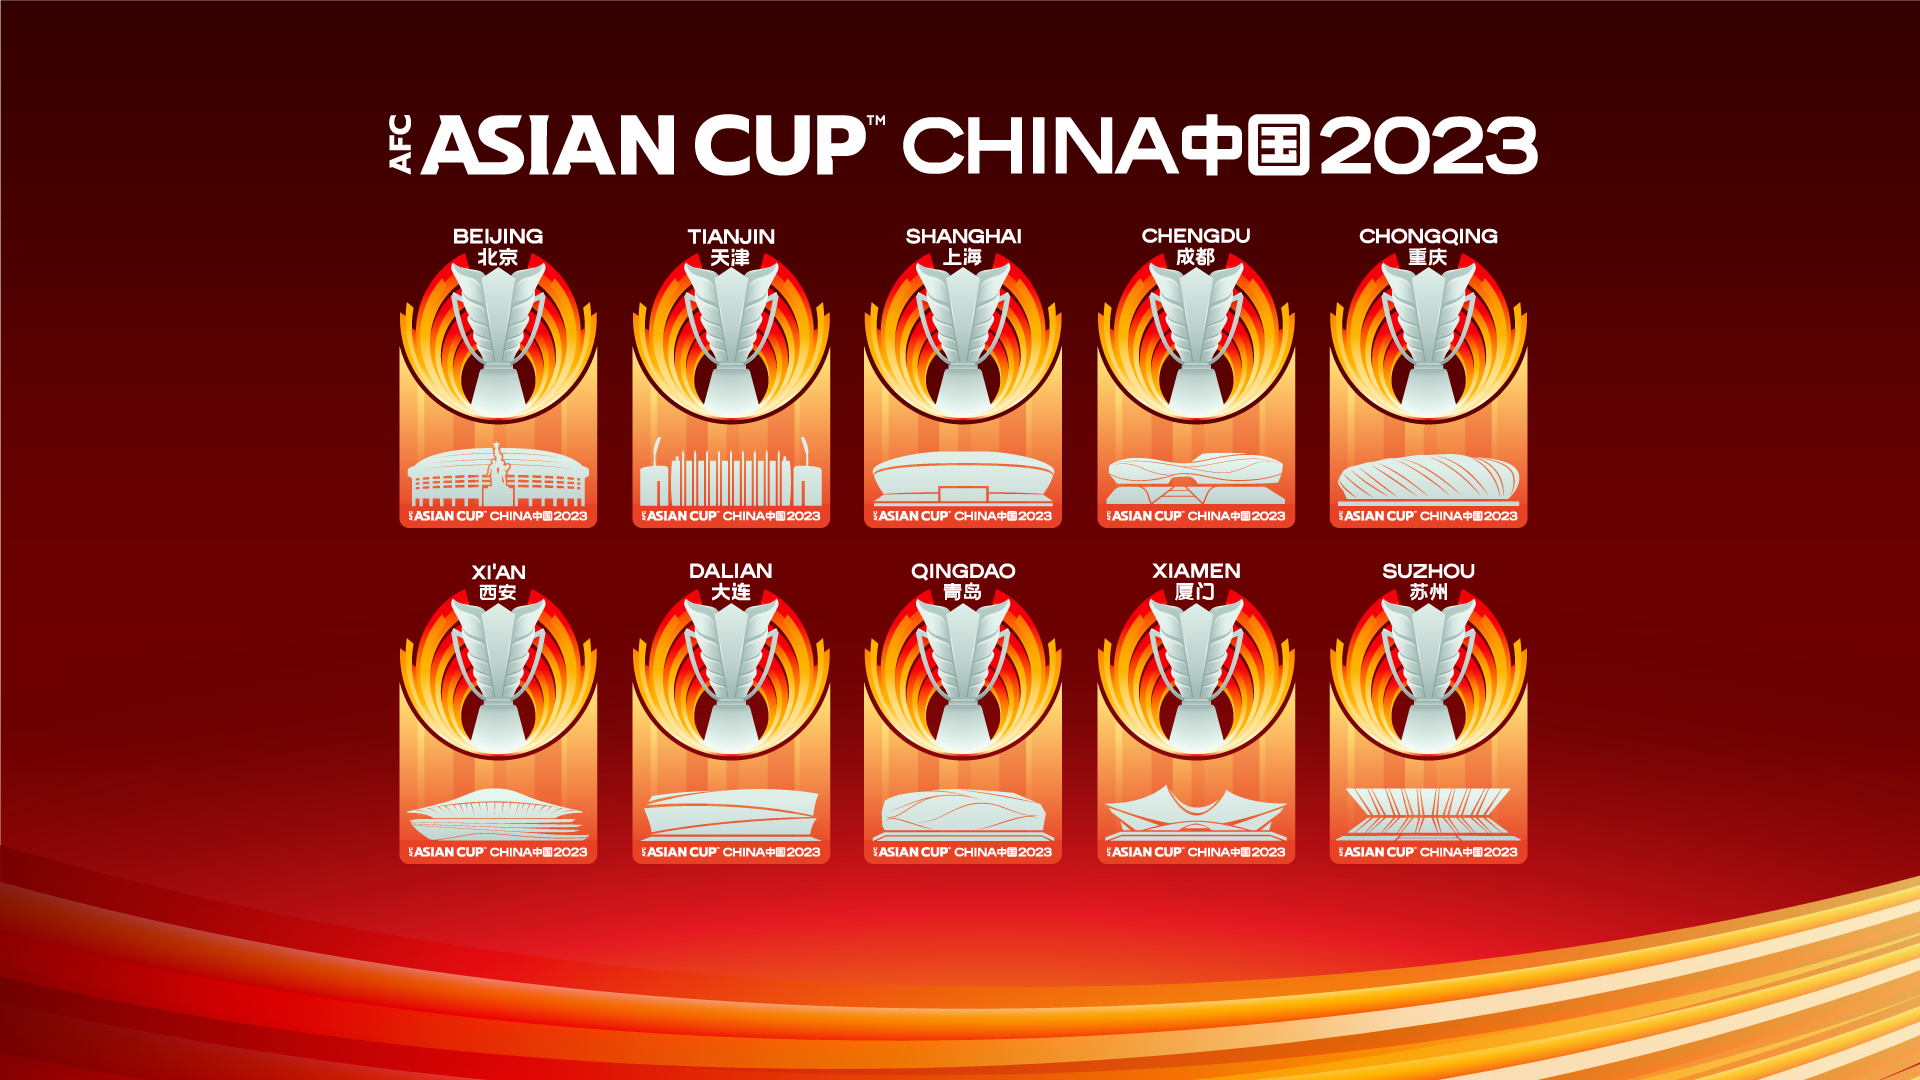 AFC Asian Cup 2023 host cities